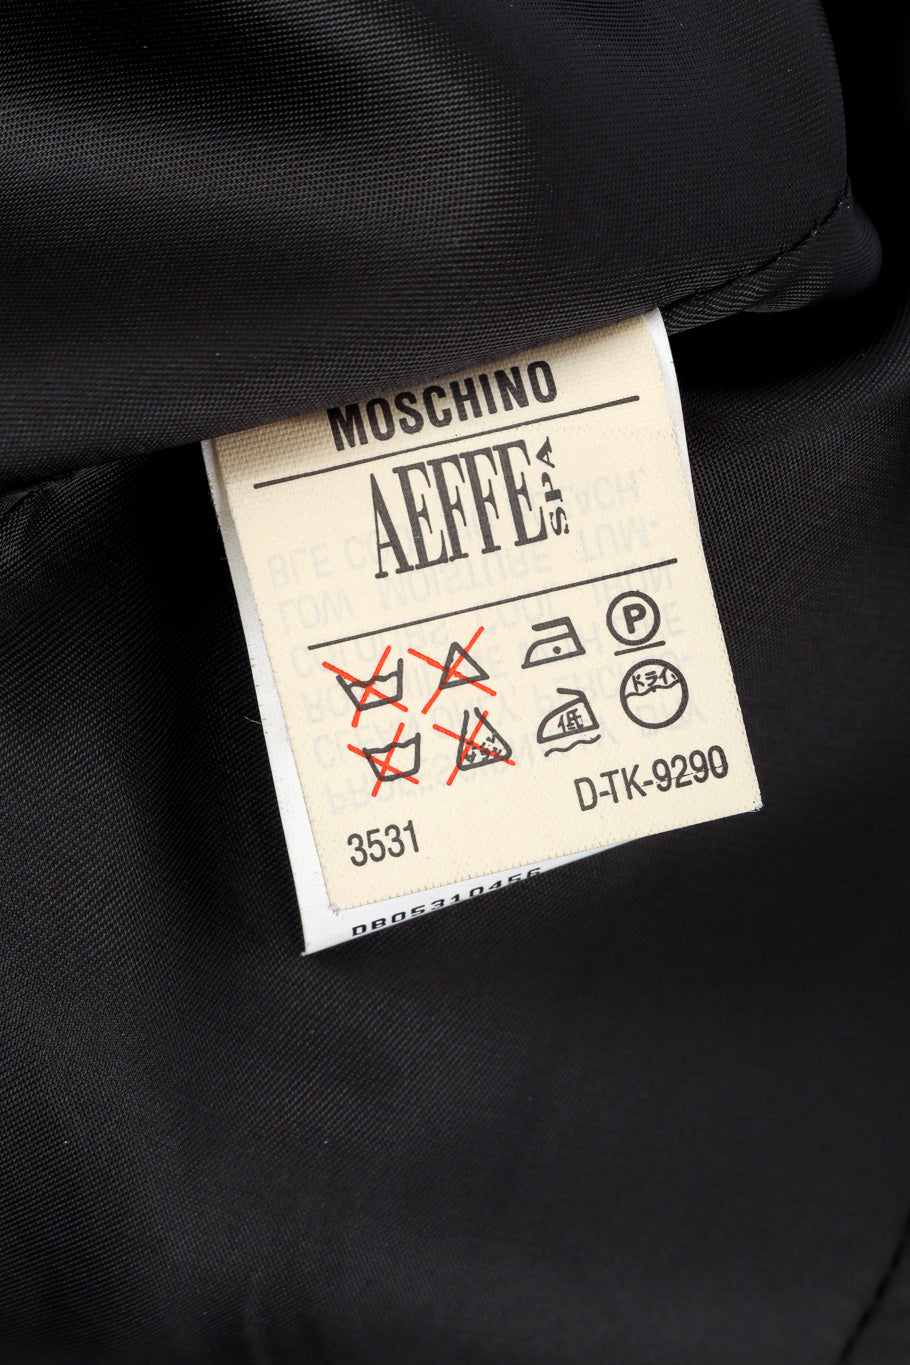 Vintage Moschino Mother of Pearl Button Blazer fabric care label @Recessla